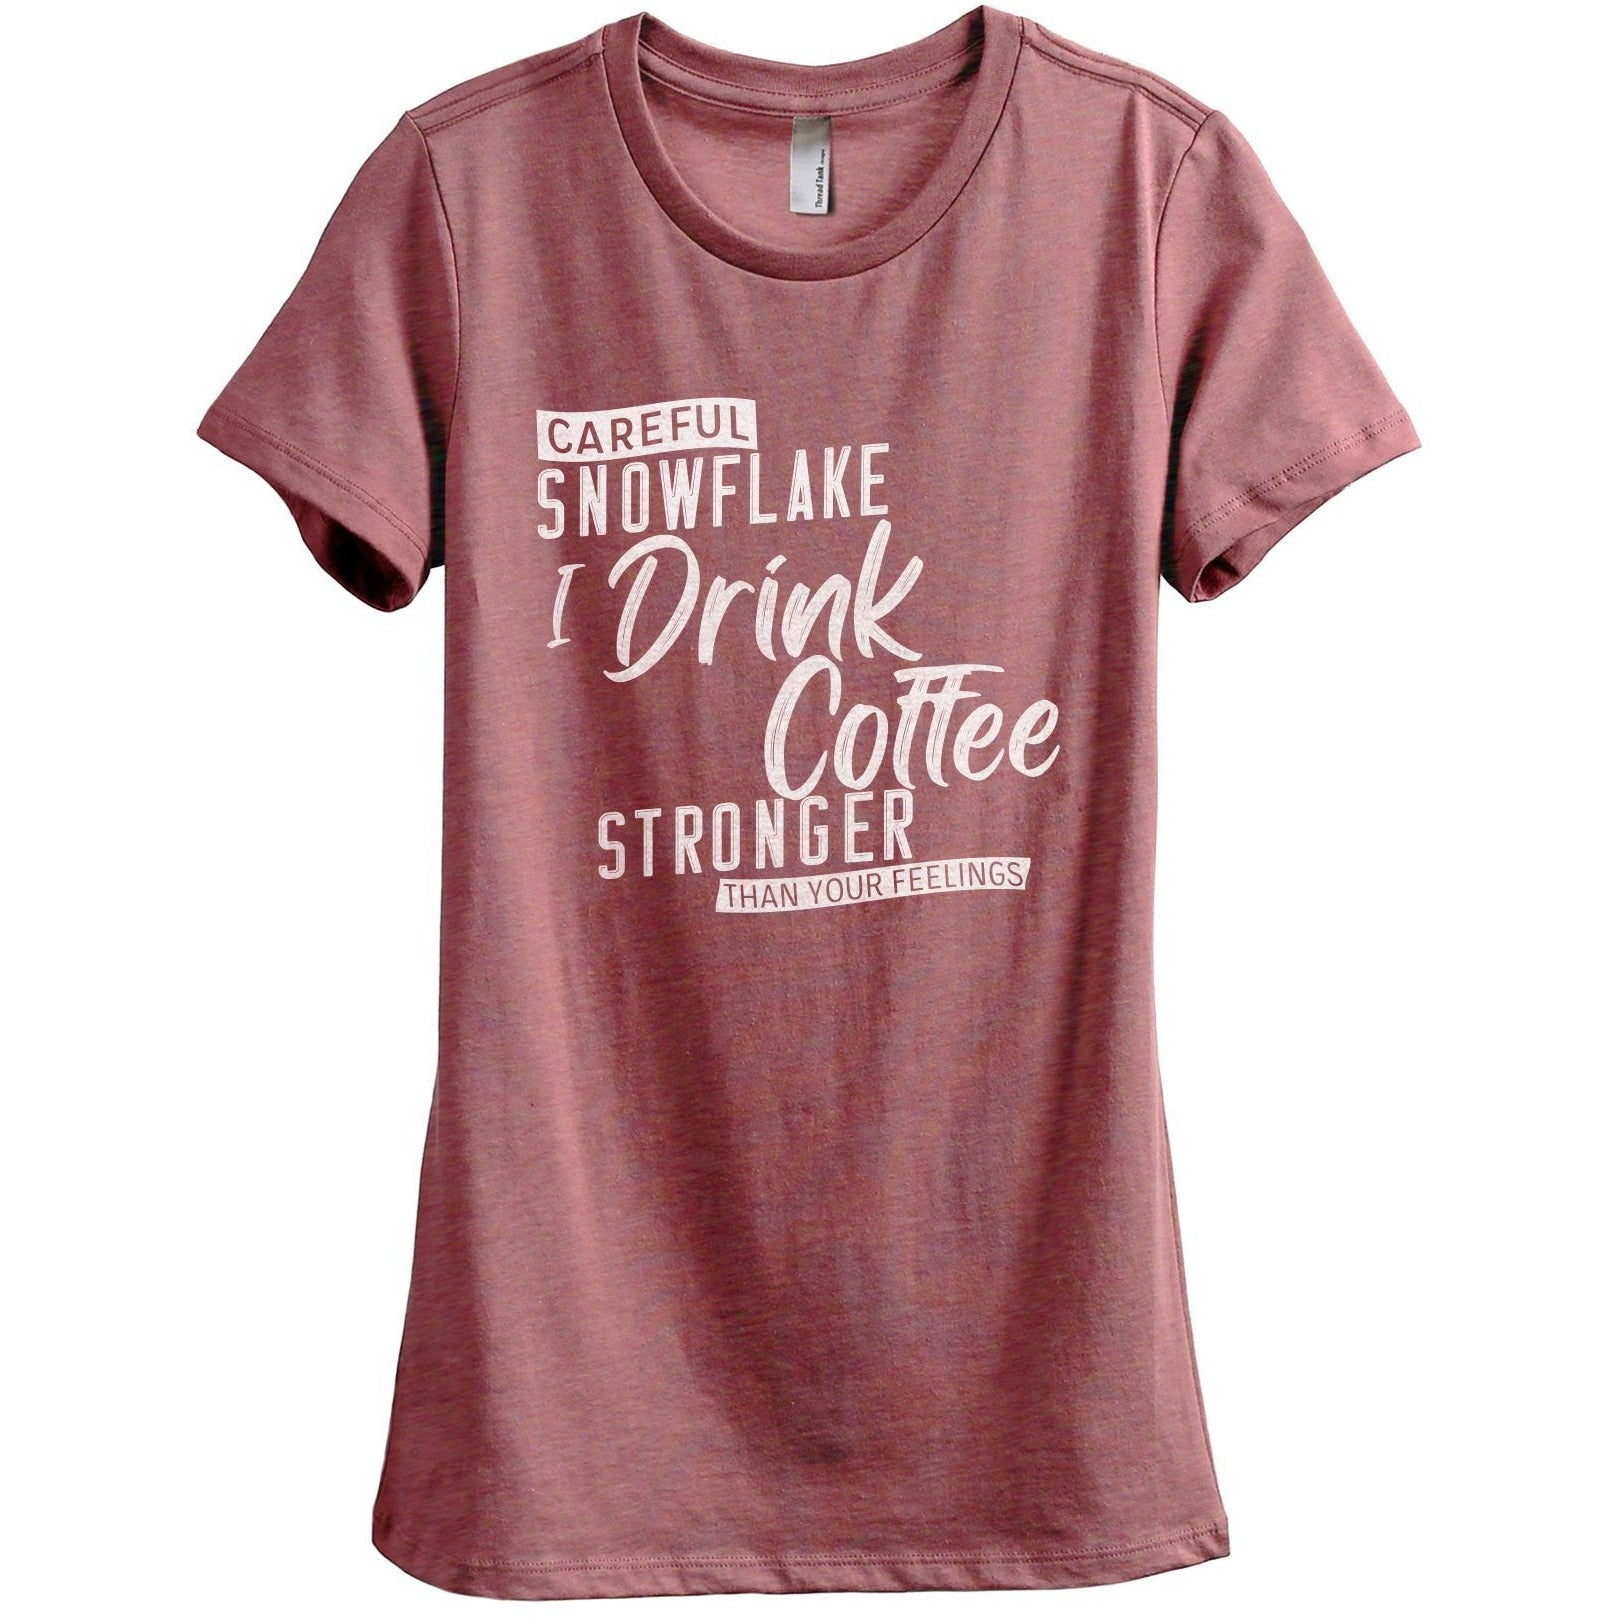 Careful Snowflake...I Drink Coffee Stronger Than Your Feelings Women's Relaxed Crewneck T-Shirt Top Tee Heather Rouge